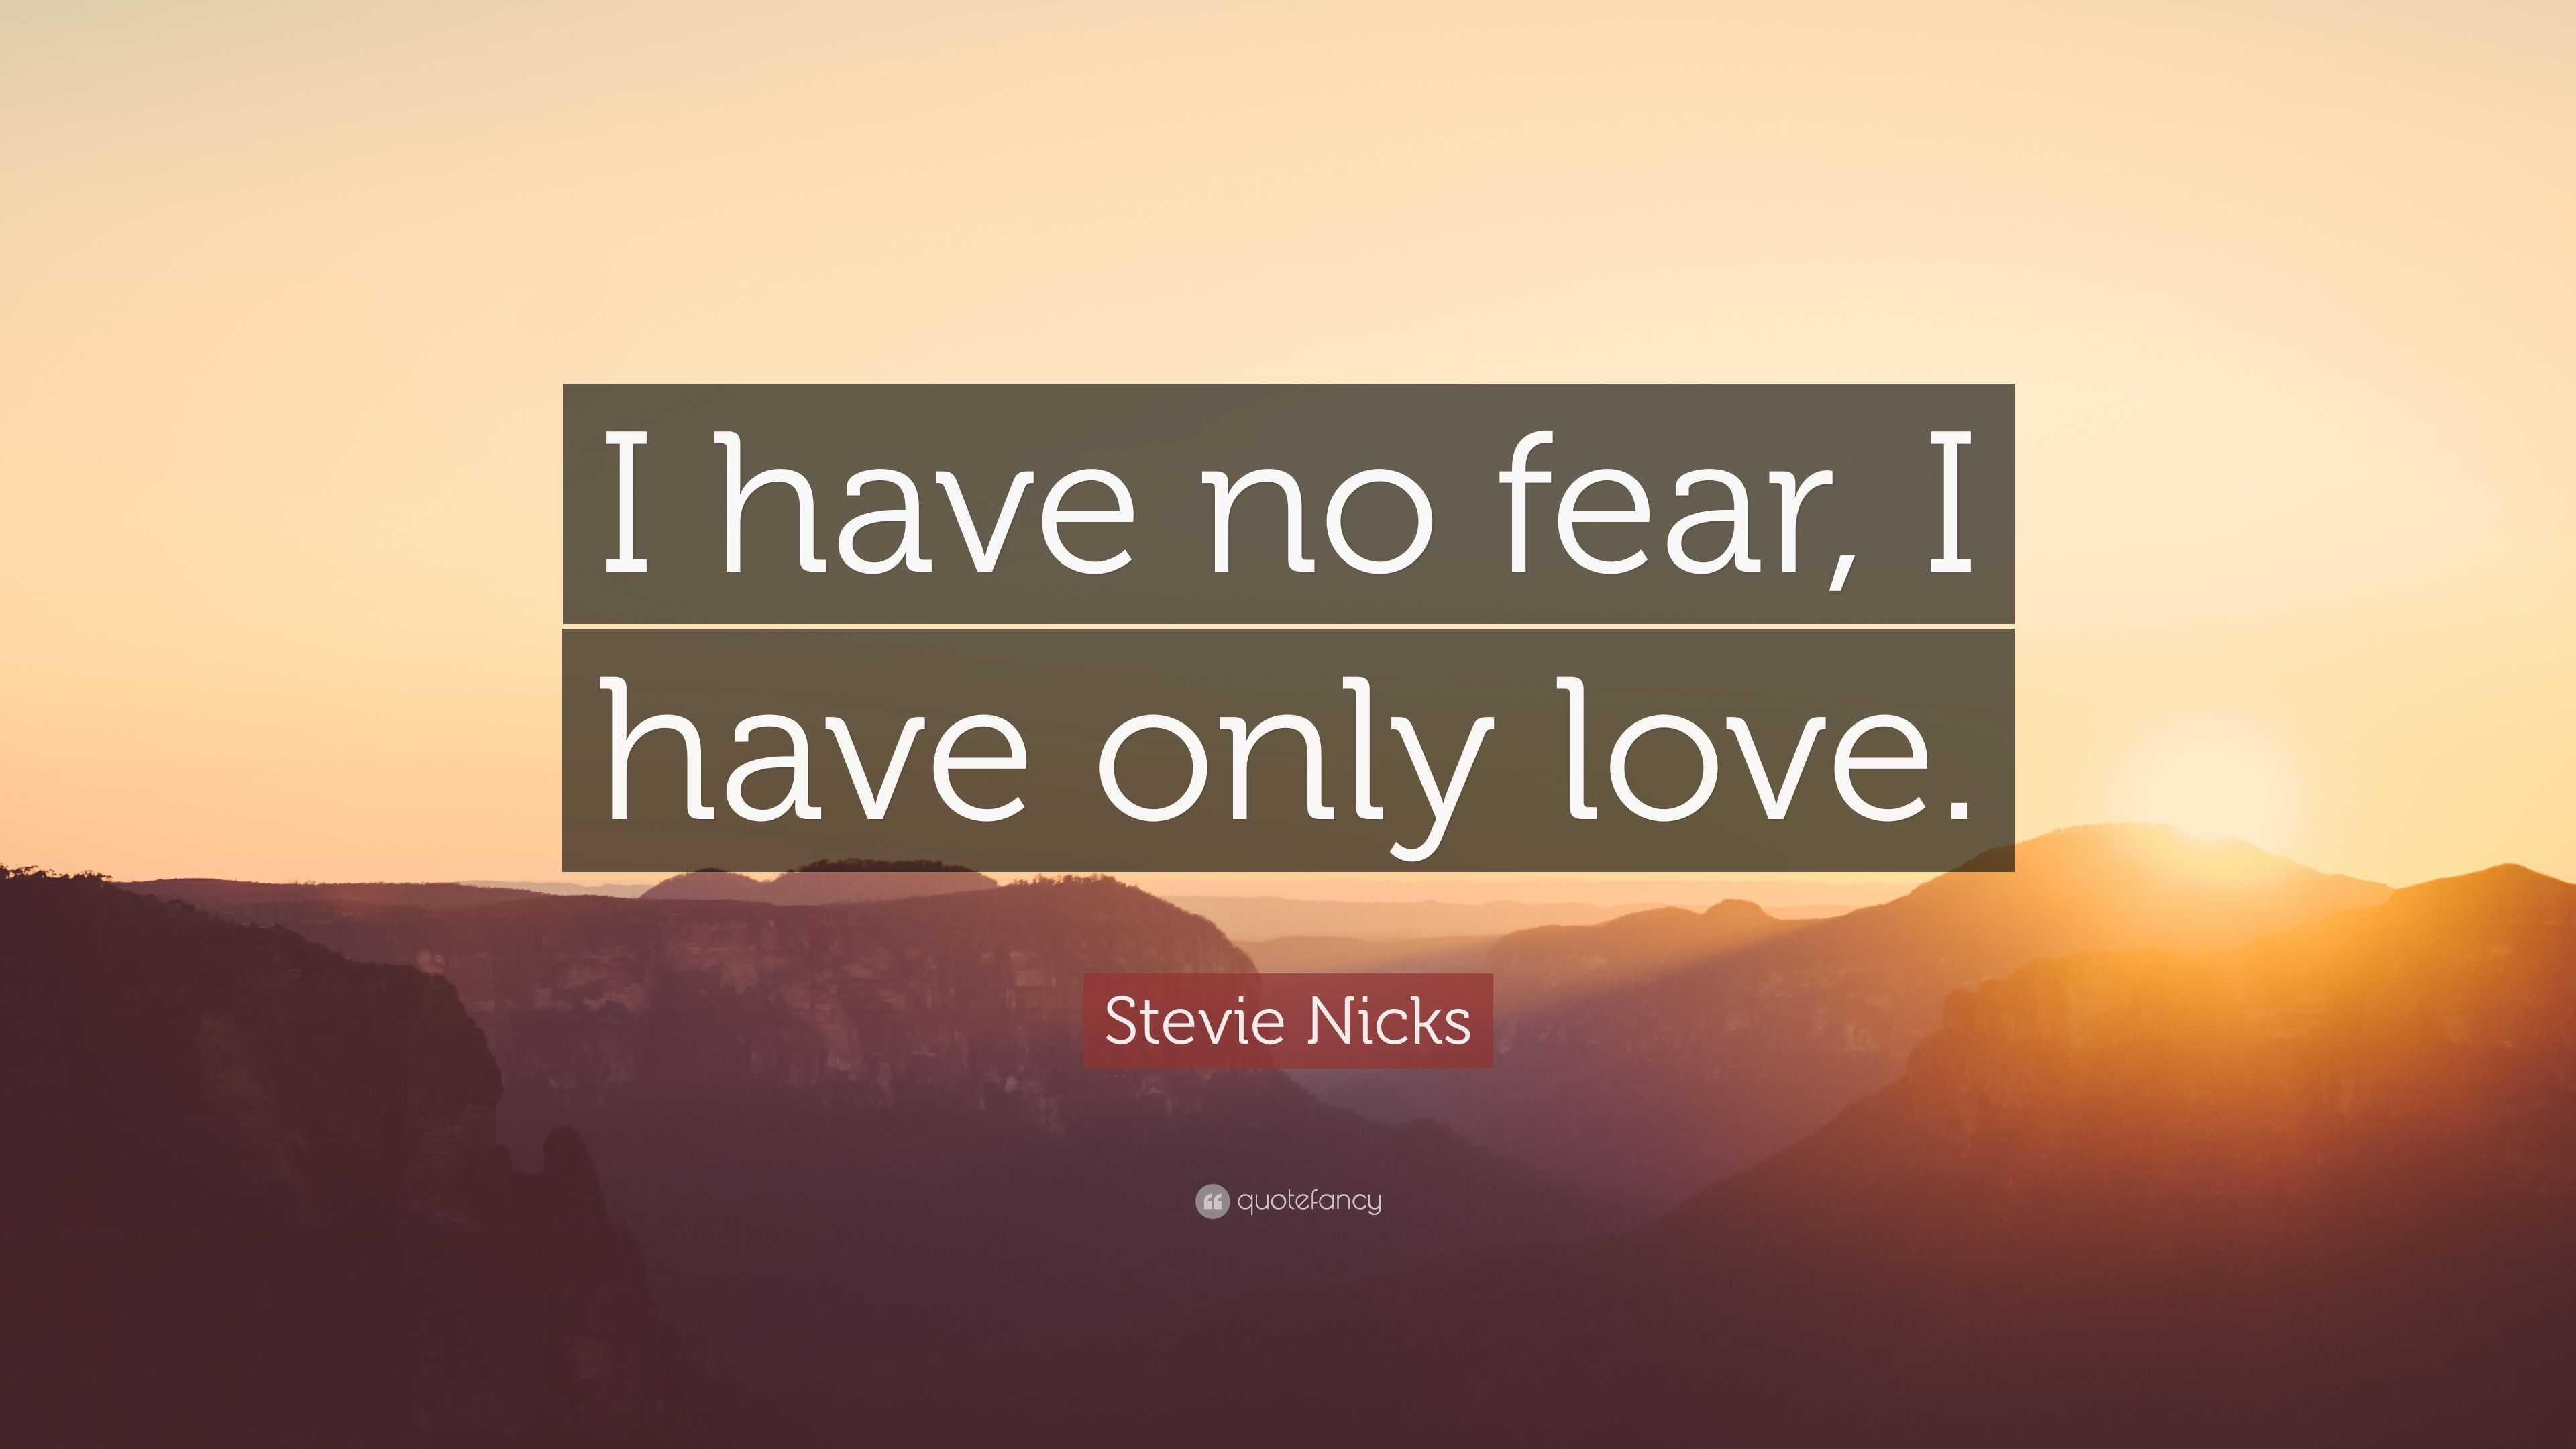 Stevie Nicks Quote “I have no fear, I have only love.”